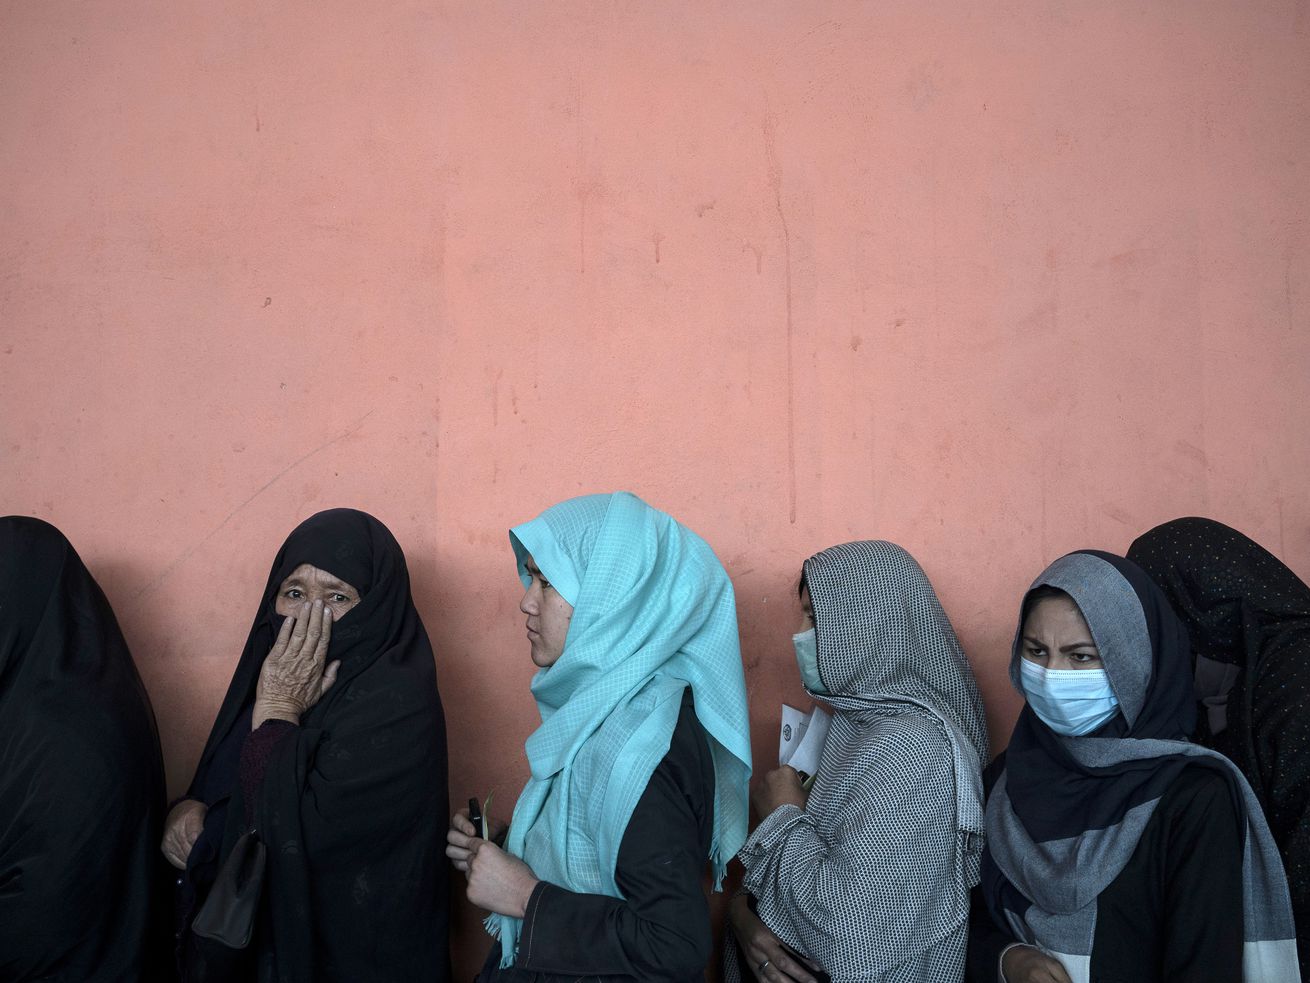 Several women wearing headscarves stand in a line against a blank wall.